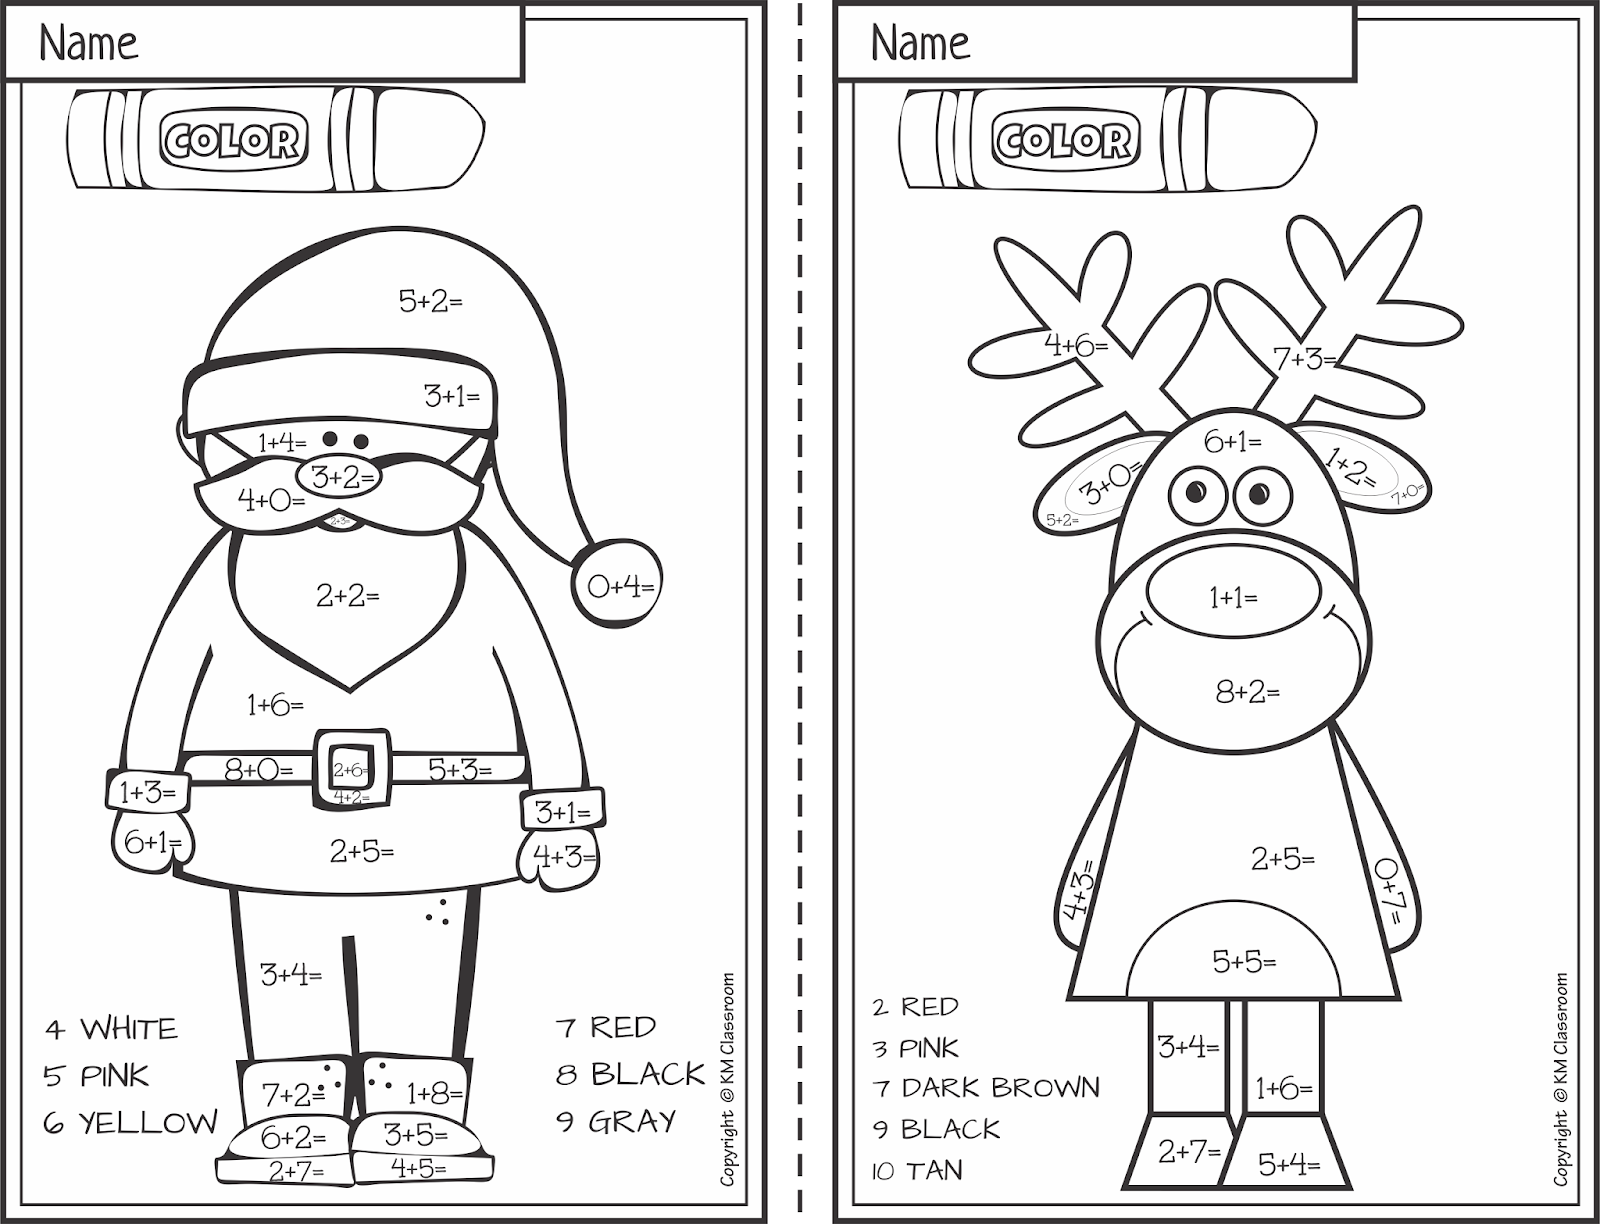 KM Classroom FREE Christmas Color By Number Addition Within 10 - Free Printable Christmas Color By Number Coloring Pages